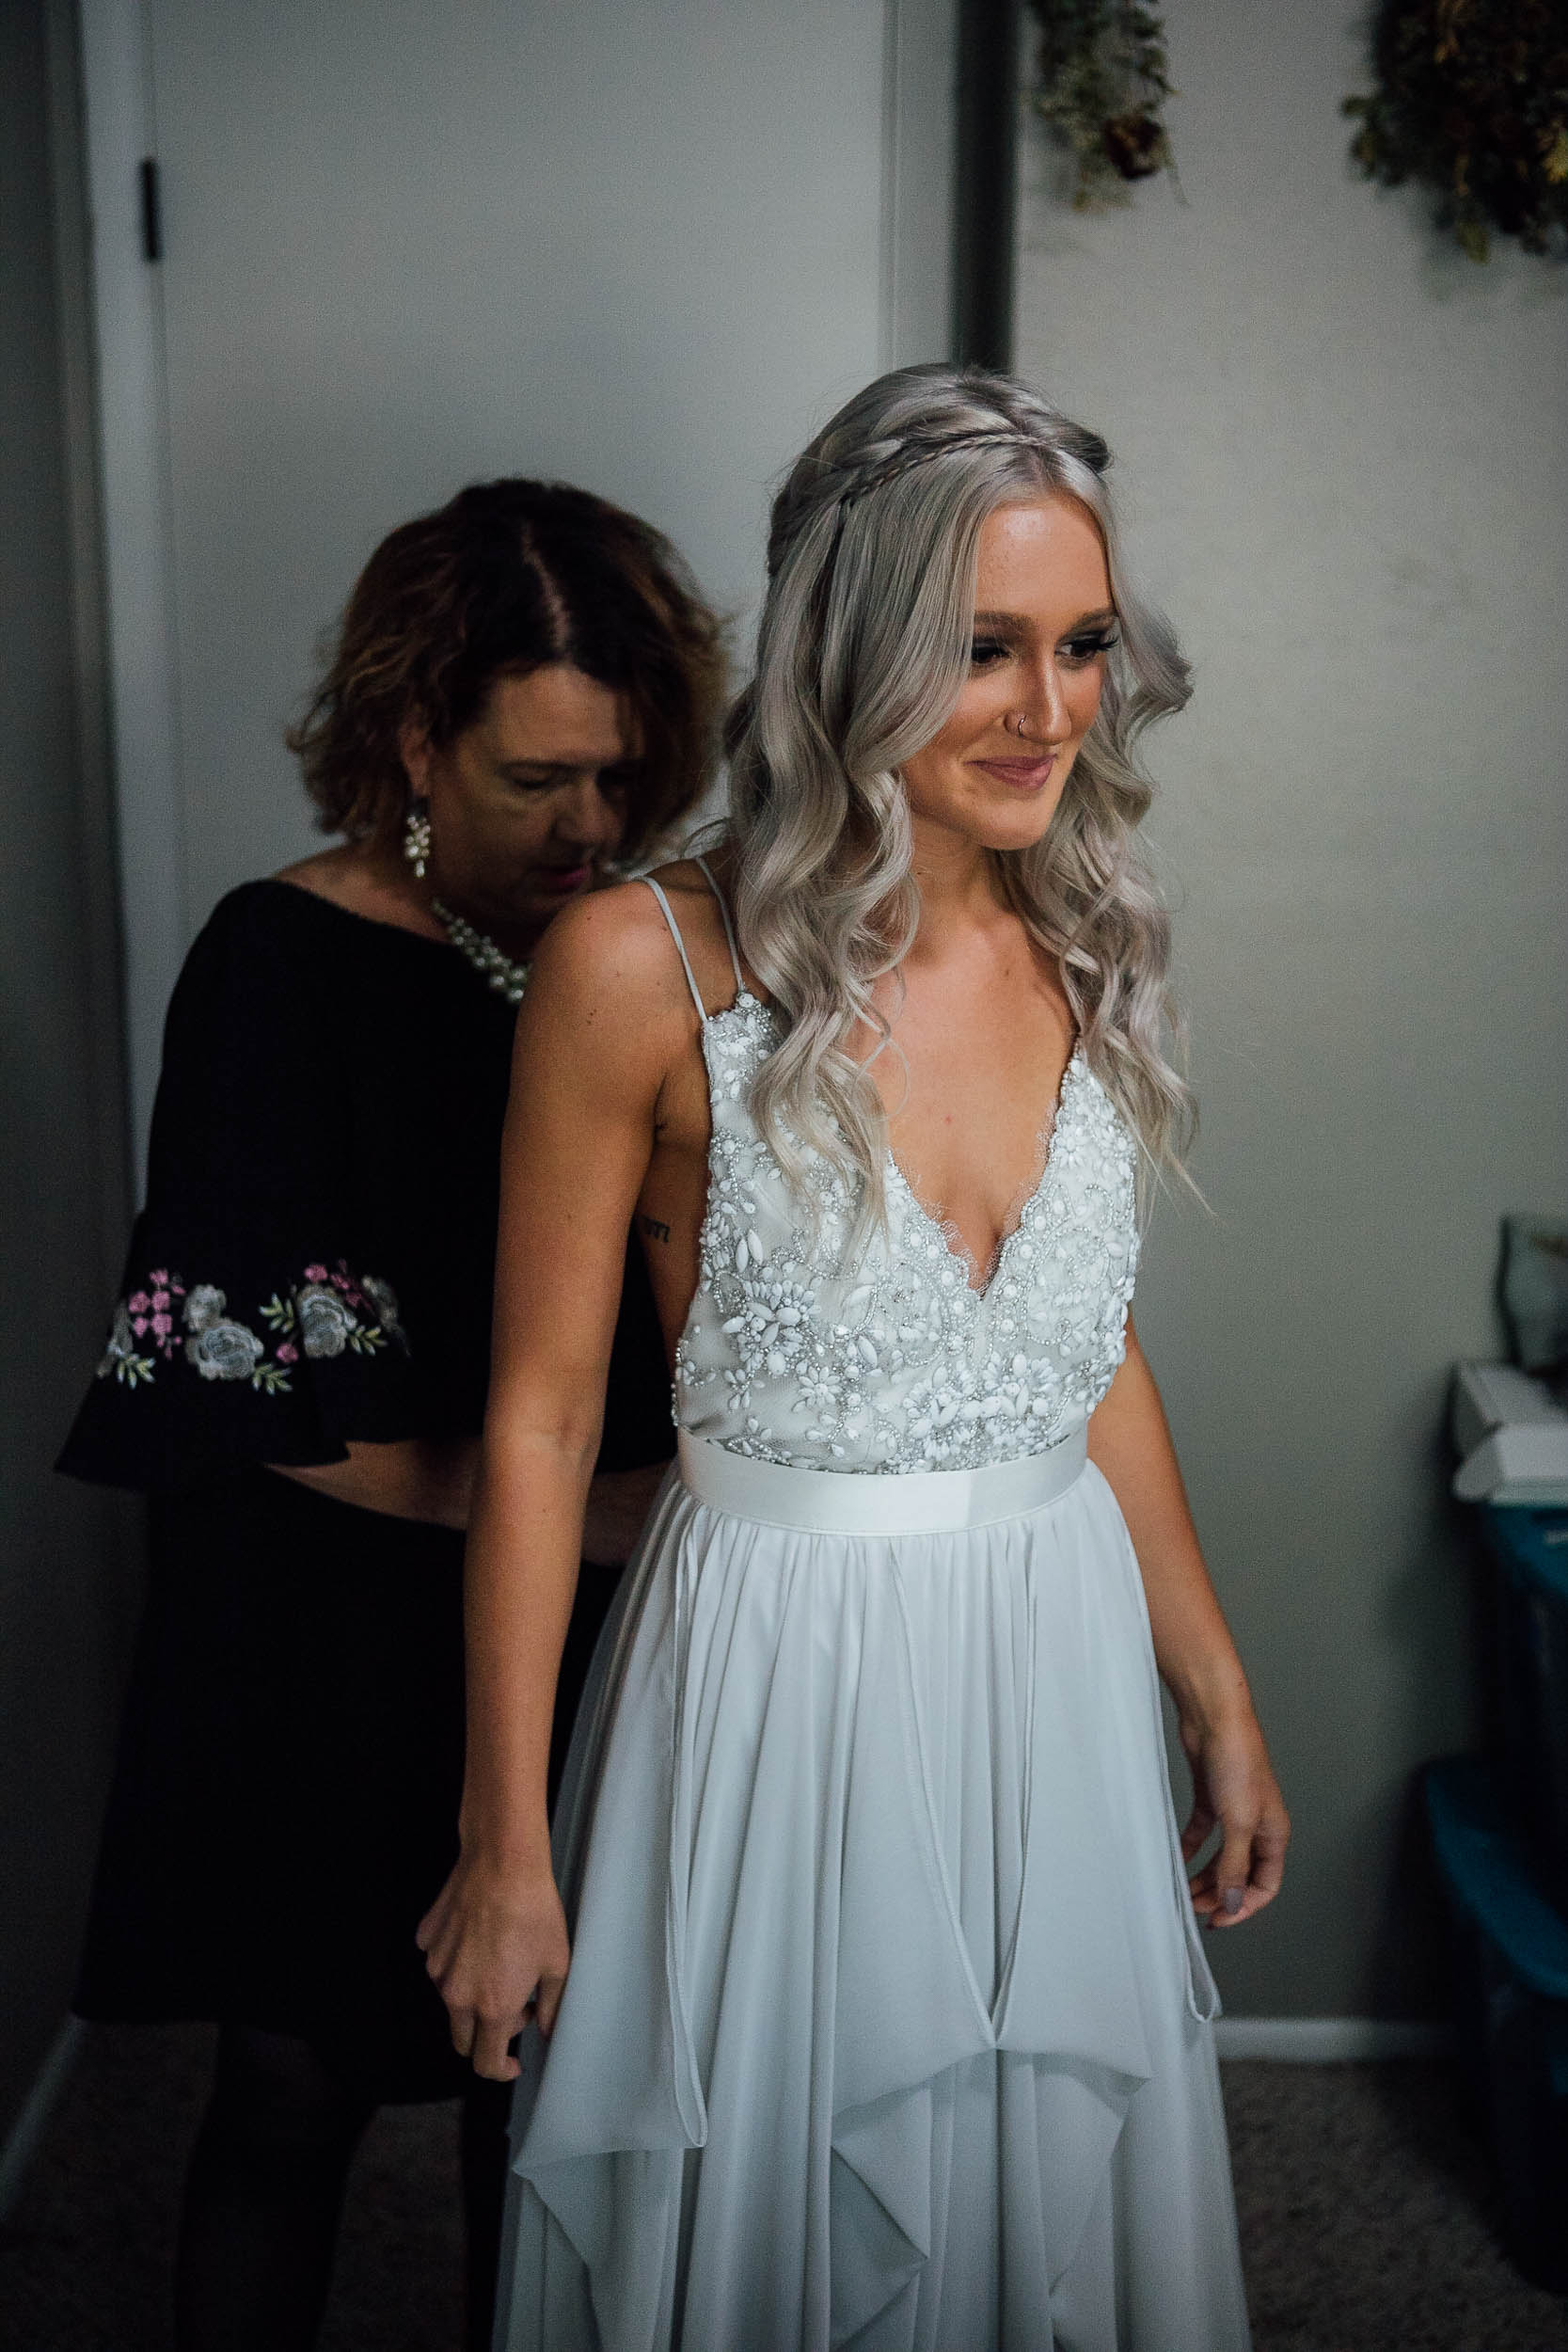 Mother of the bride helping bride put on her wedding dress